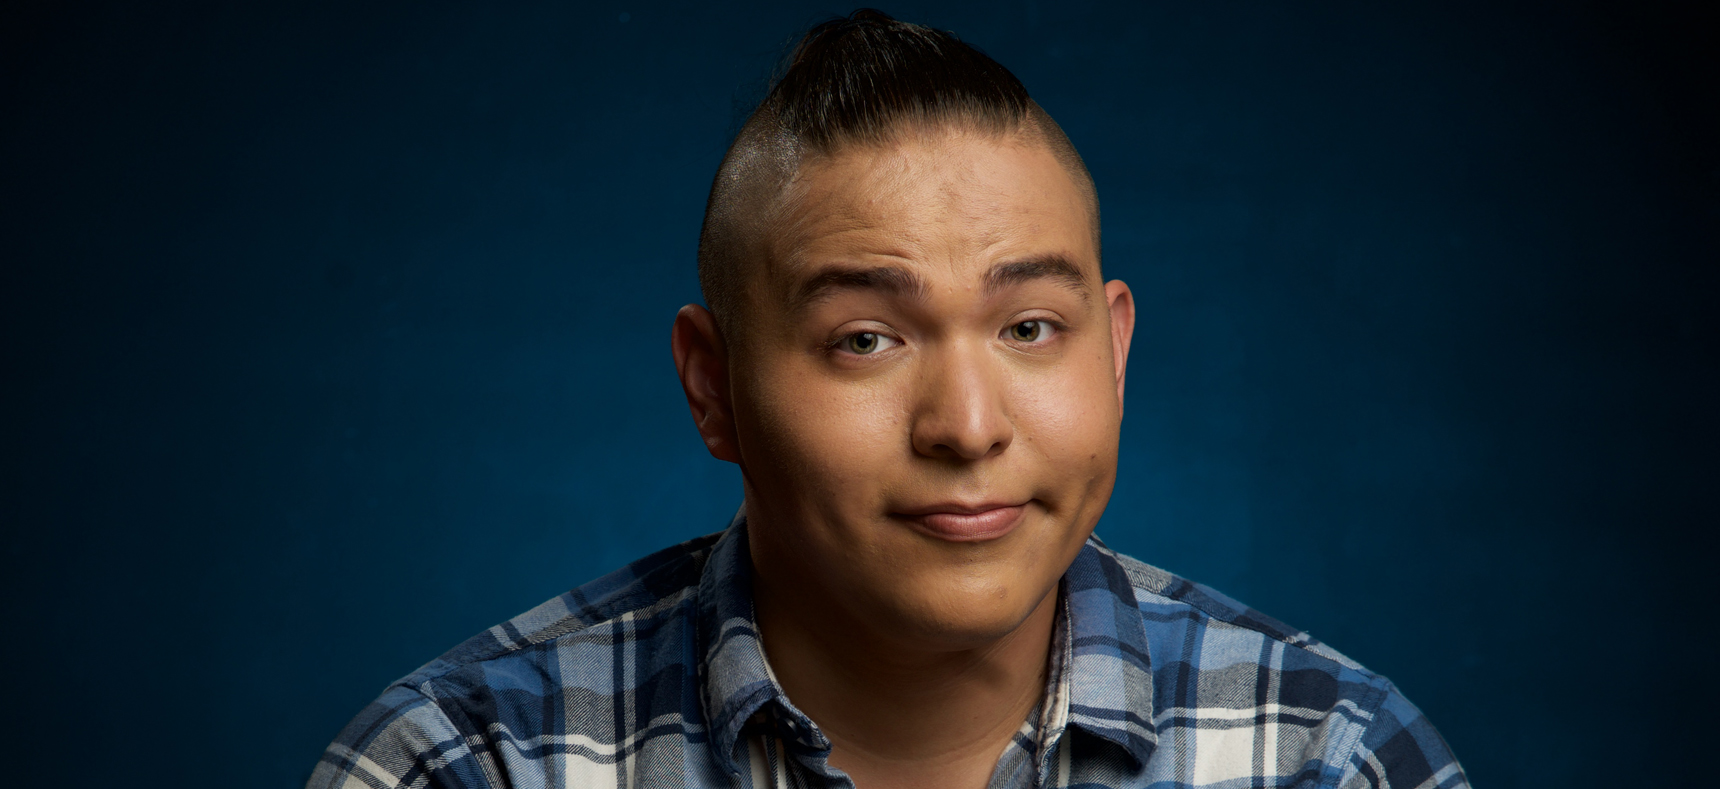 Comedian and Impressionist Julian Fernandez comes to Comedy Heights at Bay Bridge Brewing this Friday night.